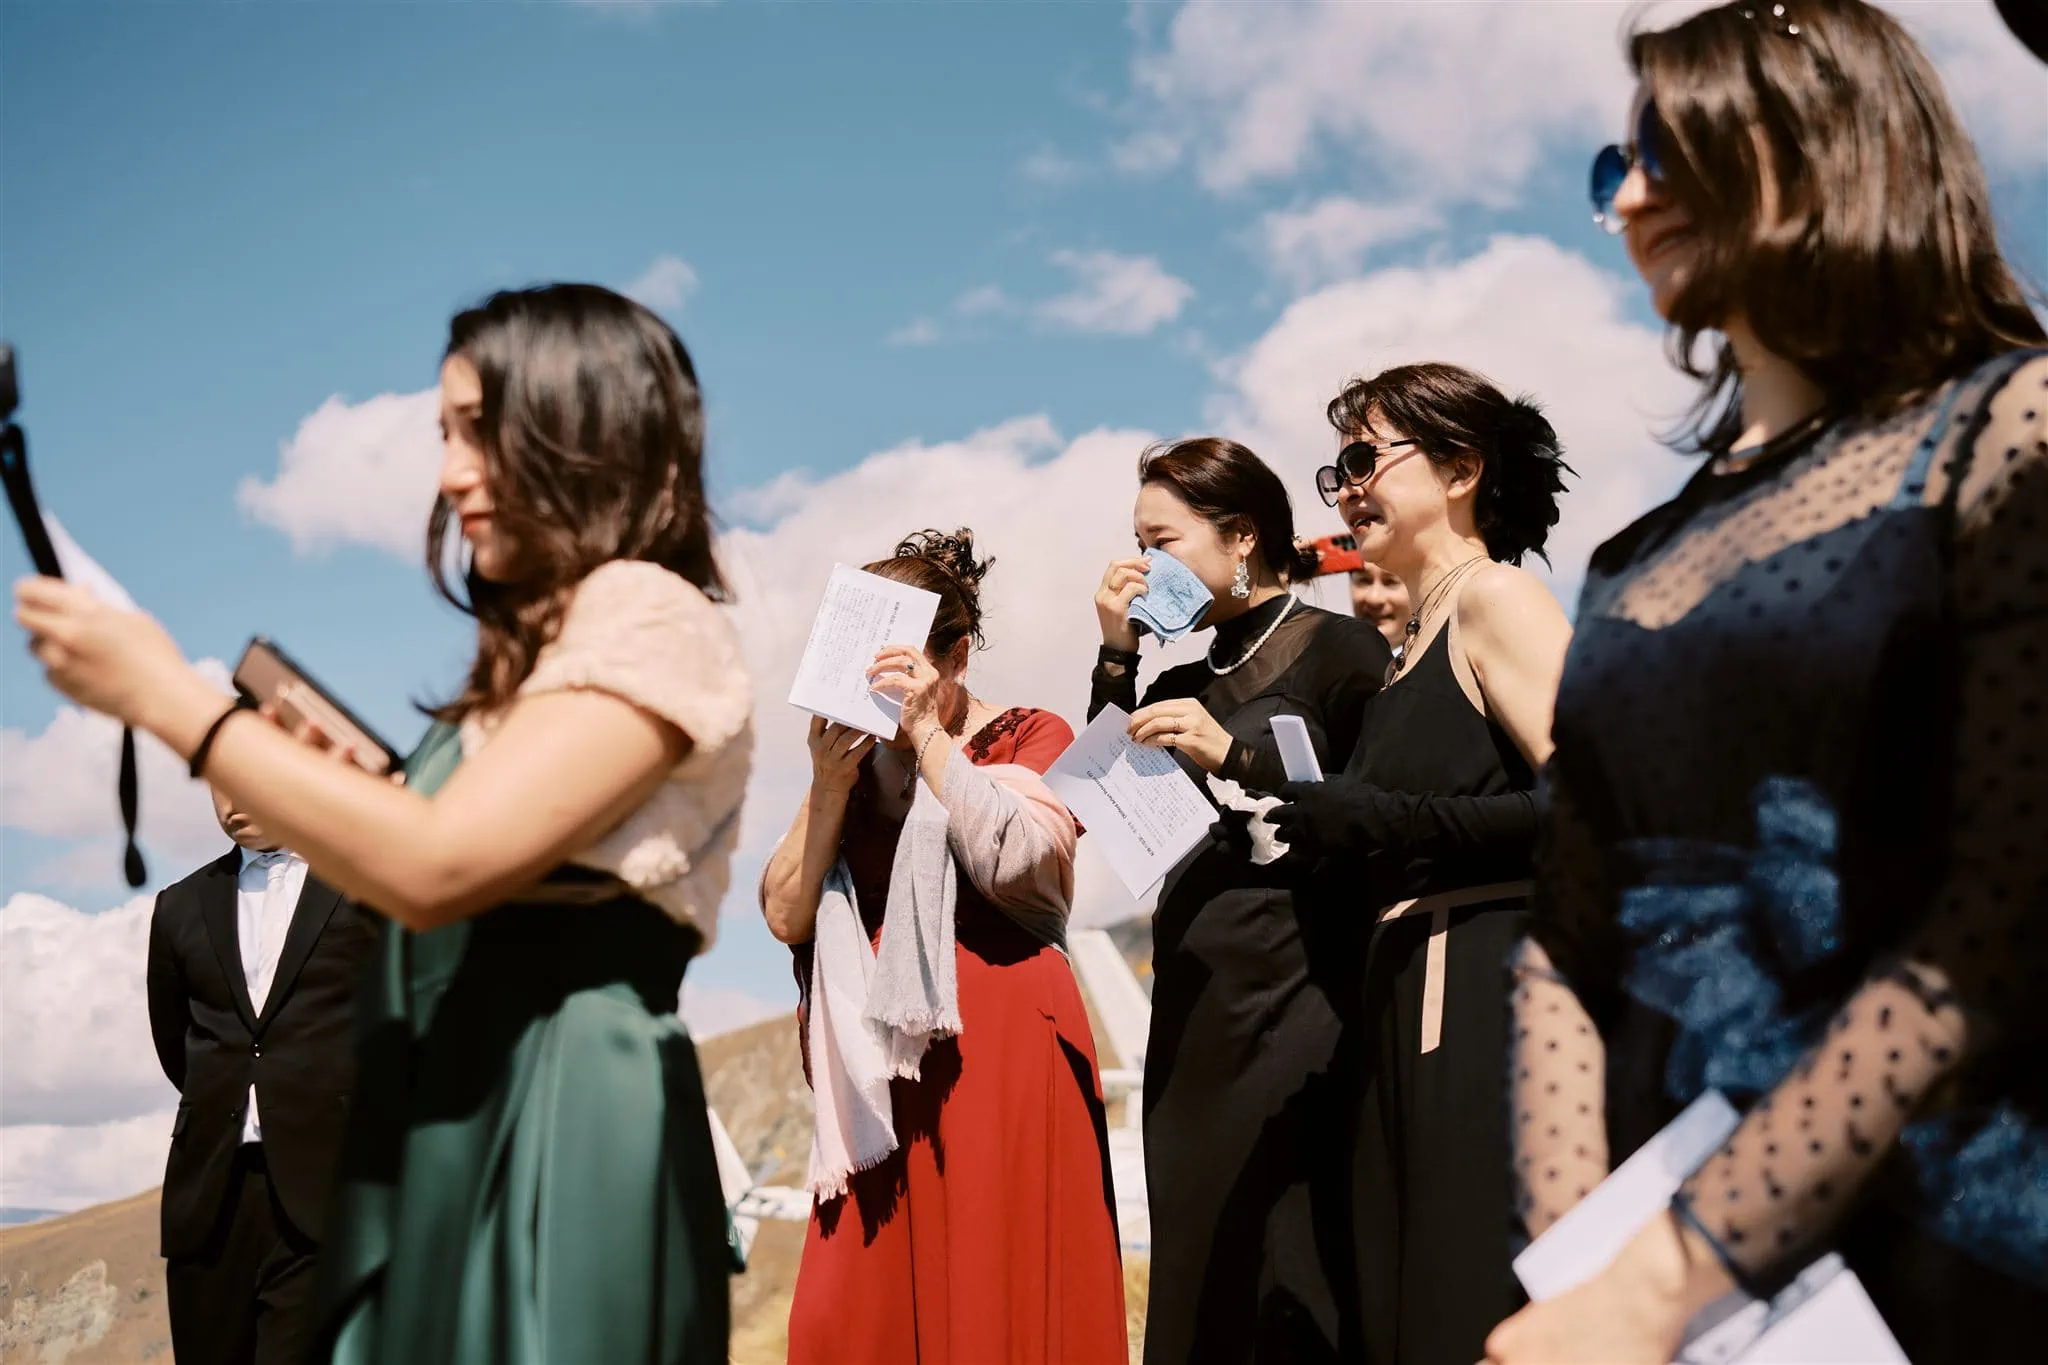 Kyoto Tokyo Japan Elopement Wedding Photographer, Planner & Videographer | A group of elegantly dressed guests at an outdoor event, possibly a wedding in Japan, with one woman dabbing her eye and others holding programs.